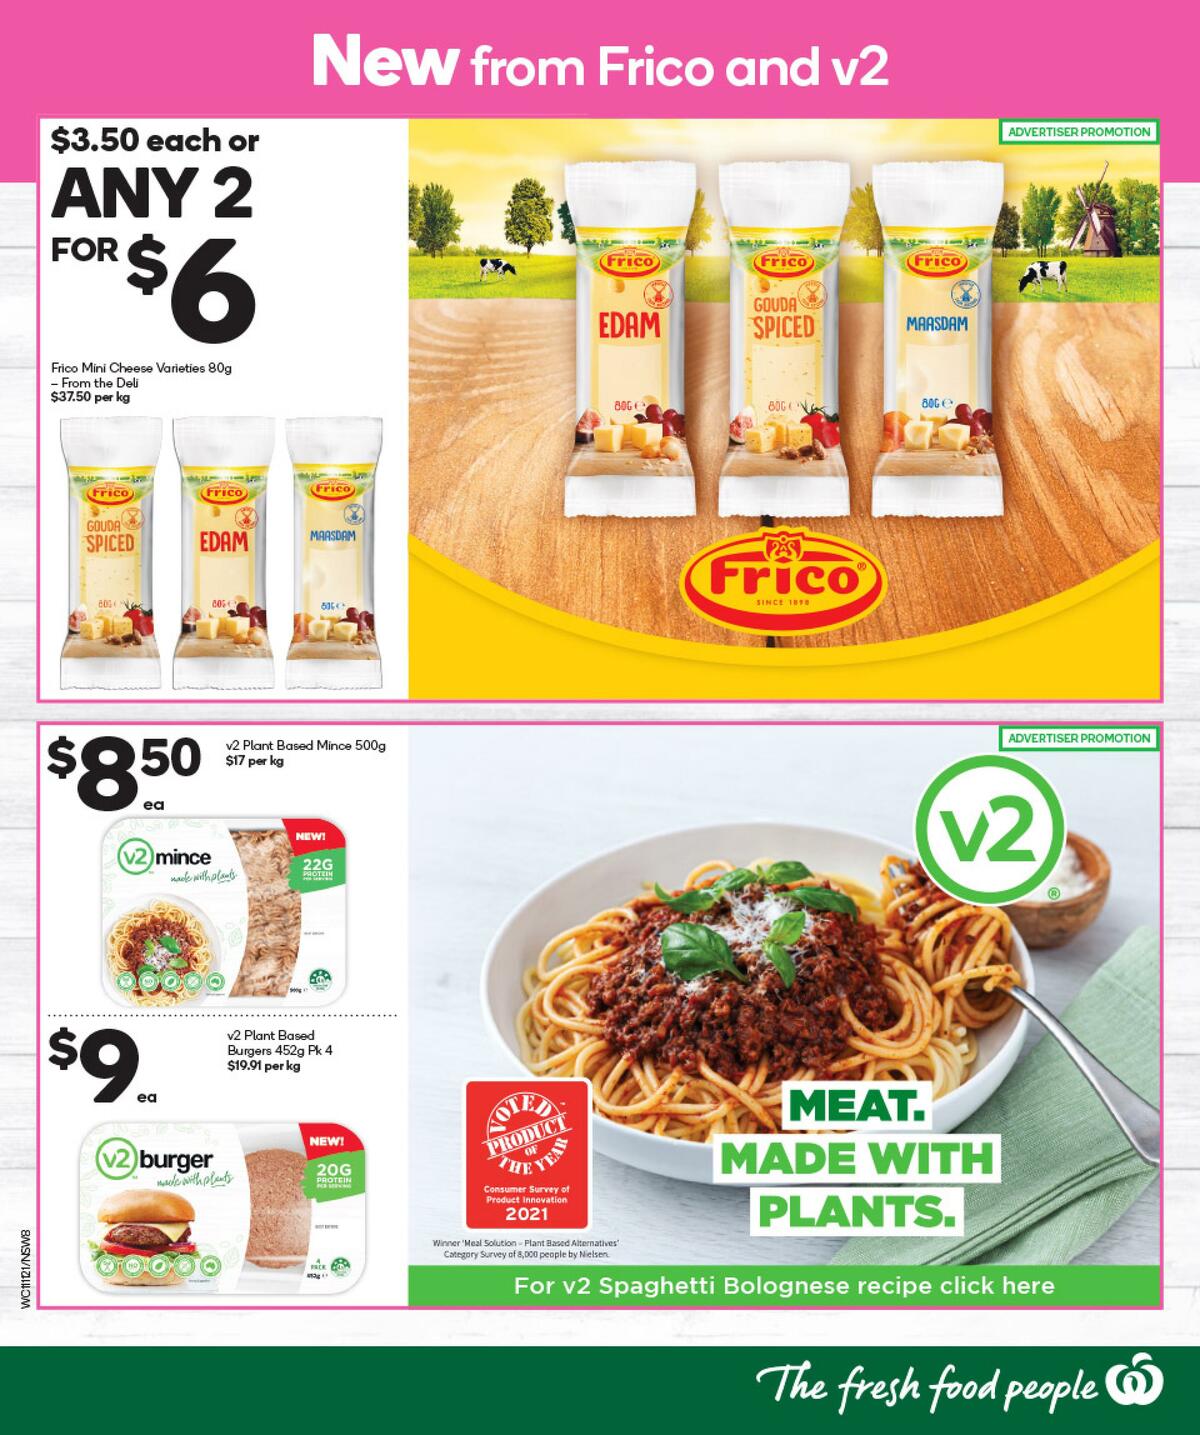 Woolworths NEW Digital Catalogues from 11 November